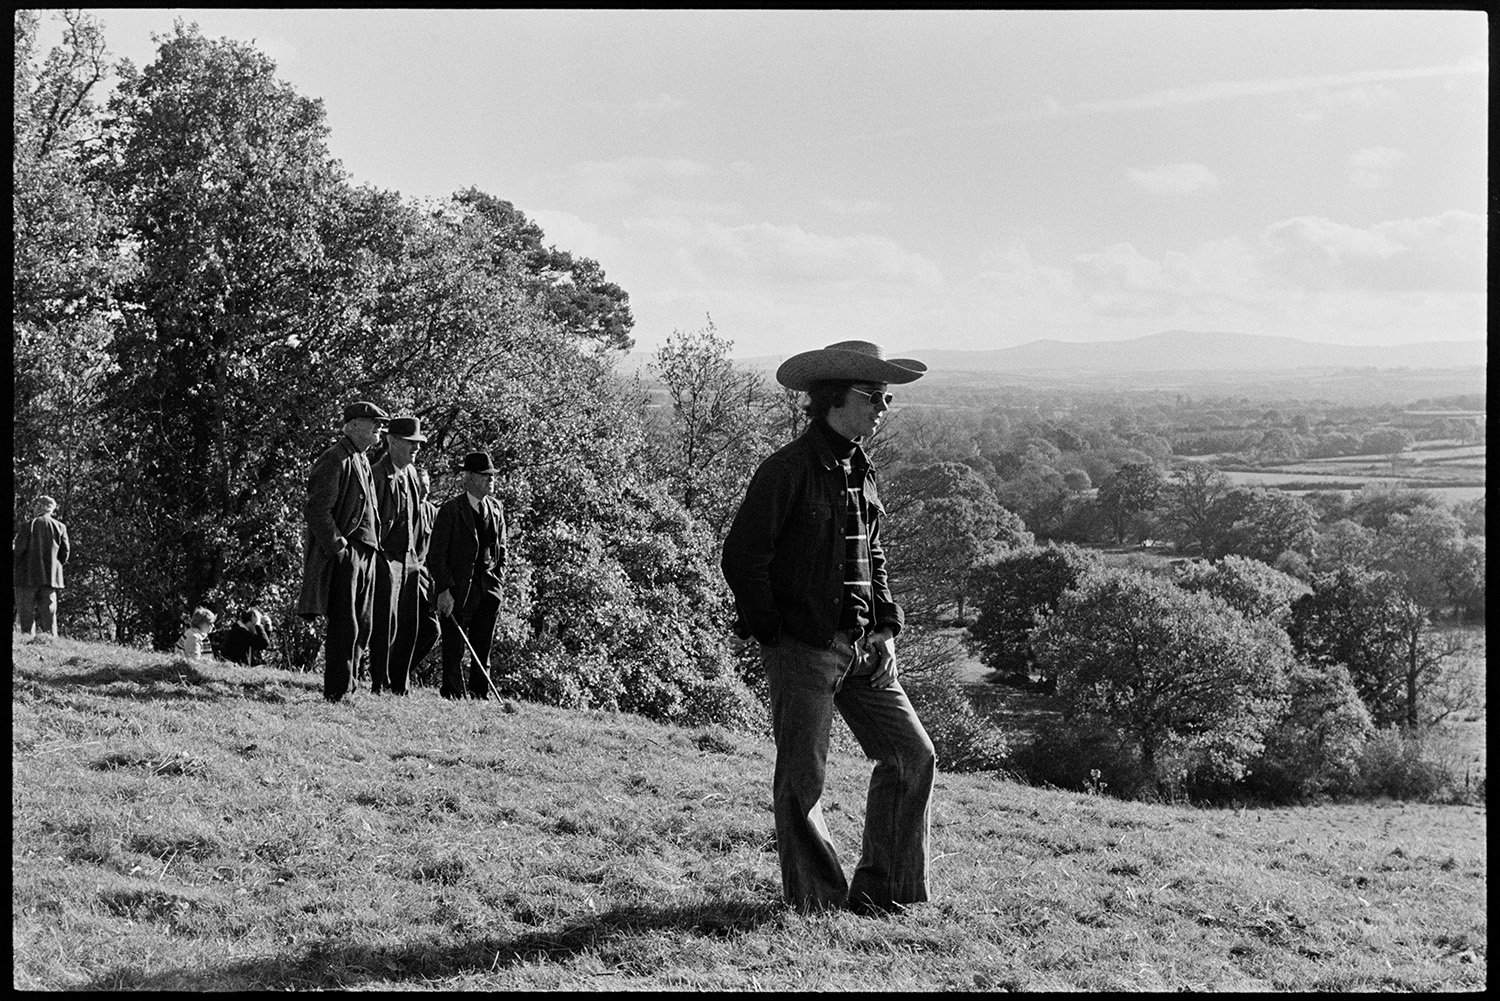 Hunt followers. 
[Men in a field watching a hunt in Hatherleigh. A man in the foreground is wearing sunglasses and a cowboy hat.]